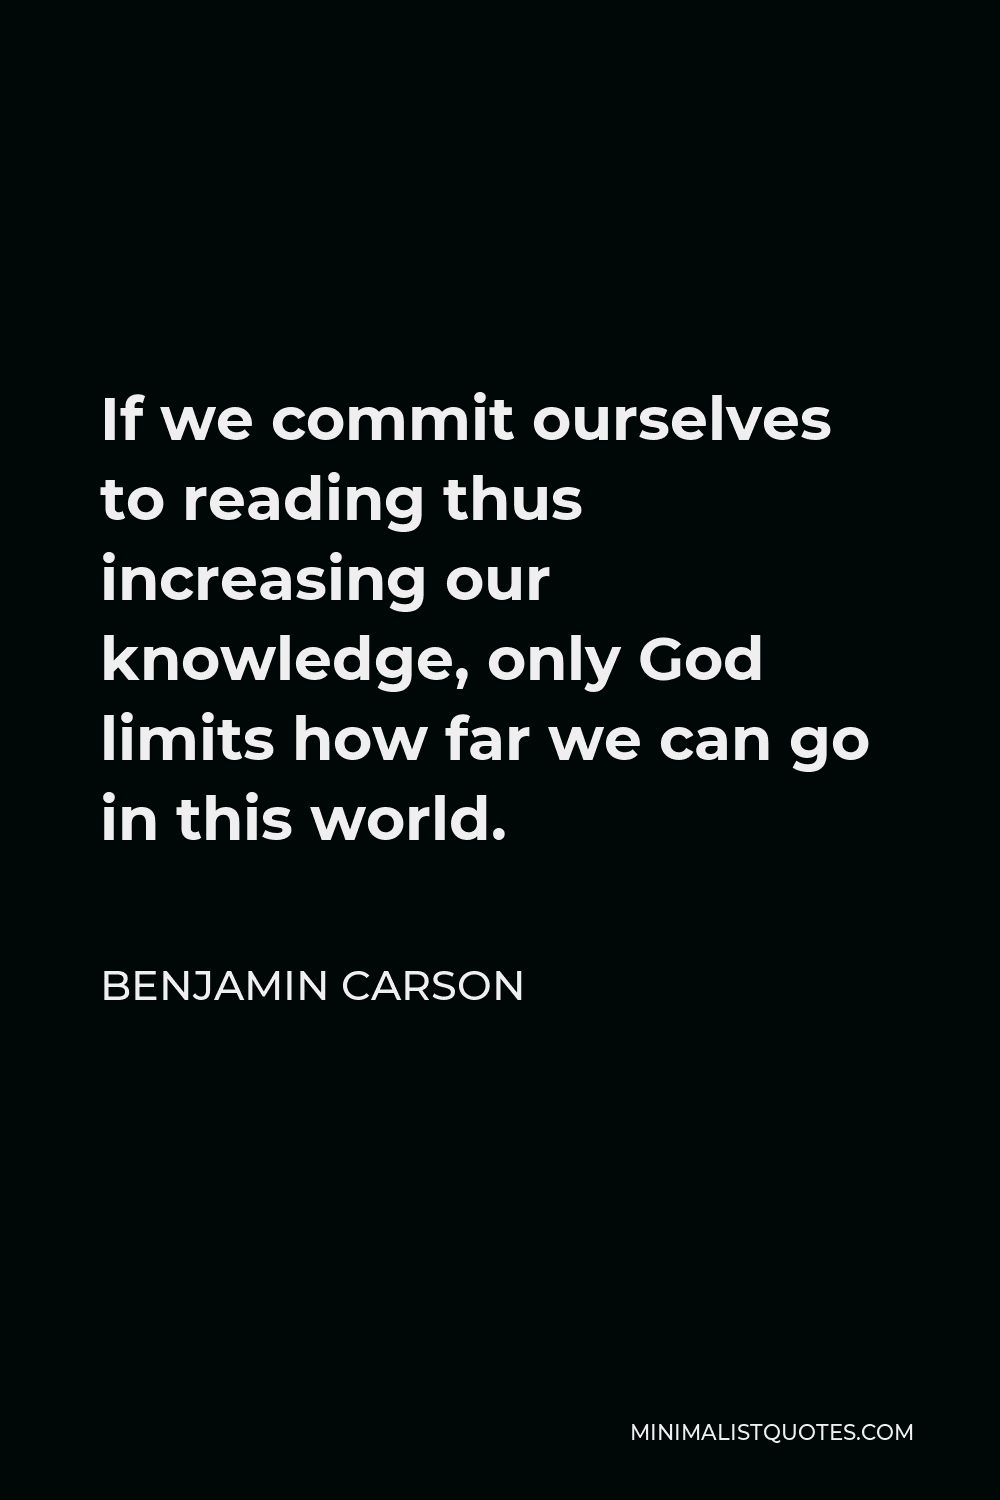 Benjamin Carson Quote - If we commit ourselves to reading thus increasing our knowledge, only God limits how far we can go in this world.